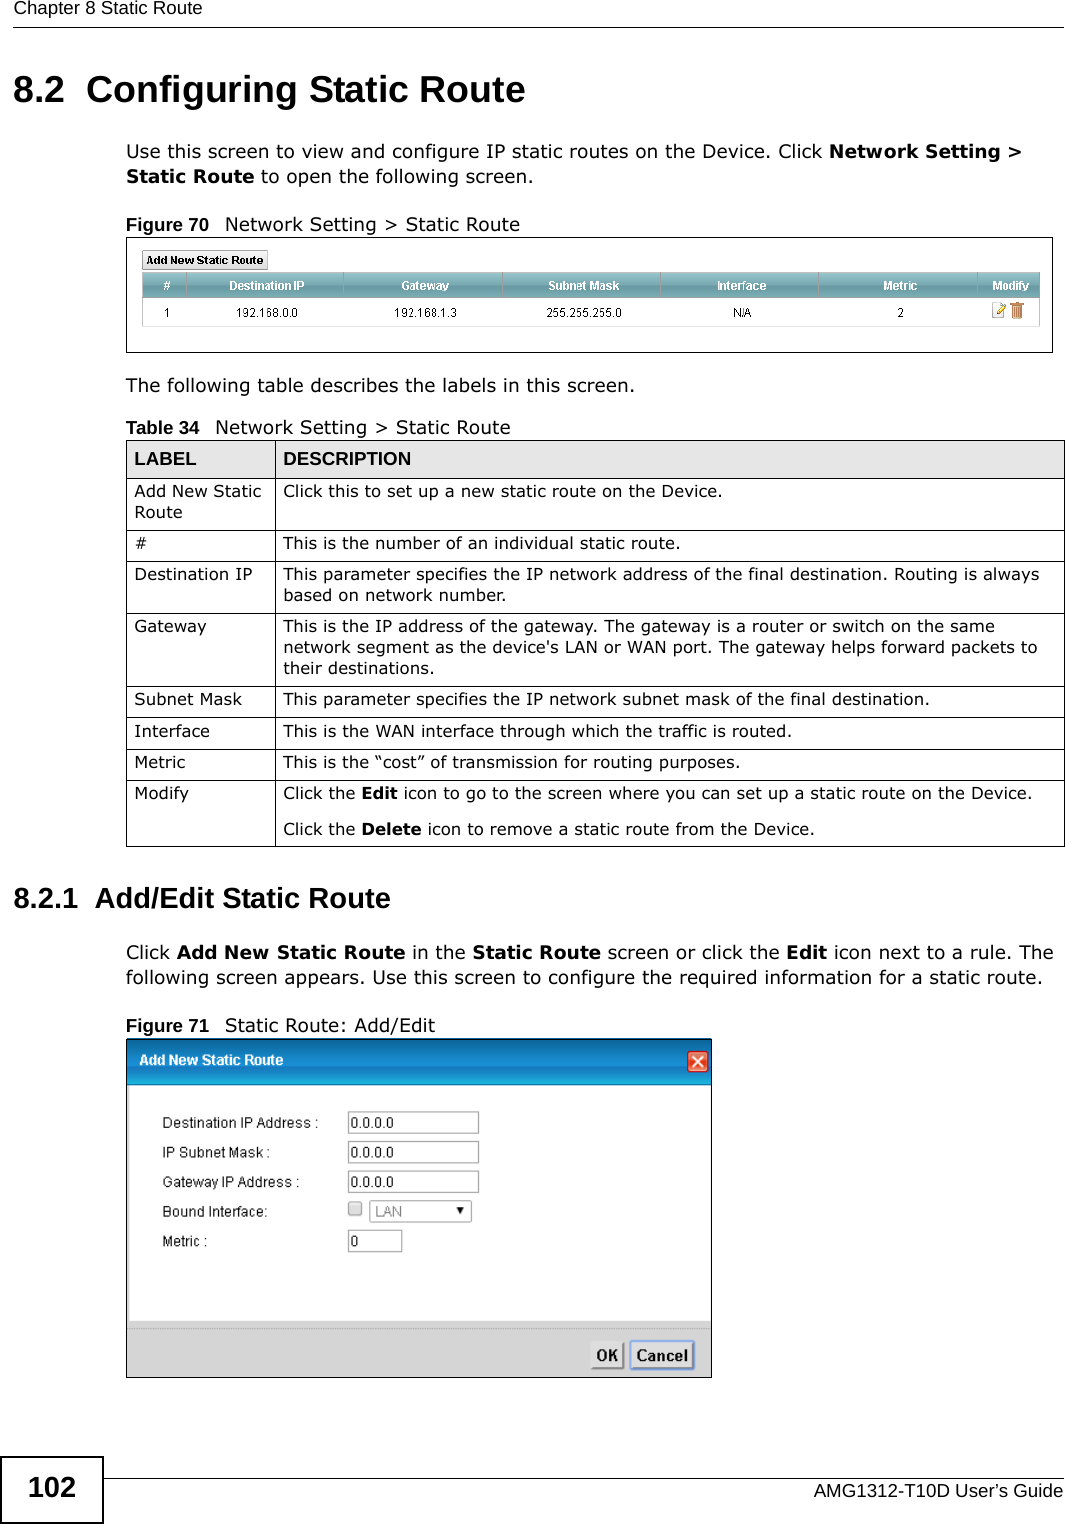 Chapter 8 Static RouteAMG1312-T10D User’s Guide1028.2  Configuring Static Route Use this screen to view and configure IP static routes on the Device. Click Network Setting &gt; Static Route to open the following screen. Figure 70   Network Setting &gt; Static RouteThe following table describes the labels in this screen. 8.2.1  Add/Edit Static Route   Click Add New Static Route in the Static Route screen or click the Edit icon next to a rule. The following screen appears. Use this screen to configure the required information for a static route.Figure 71   Static Route: Add/EditTable 34   Network Setting &gt; Static RouteLABEL DESCRIPTIONAdd New Static RouteClick this to set up a new static route on the Device.# This is the number of an individual static route.Destination IP This parameter specifies the IP network address of the final destination. Routing is always based on network number. Gateway This is the IP address of the gateway. The gateway is a router or switch on the same network segment as the device&apos;s LAN or WAN port. The gateway helps forward packets to their destinations.Subnet Mask This parameter specifies the IP network subnet mask of the final destination.Interface This is the WAN interface through which the traffic is routed.Metric This is the “cost” of transmission for routing purposes. Modify Click the Edit icon to go to the screen where you can set up a static route on the Device.Click the Delete icon to remove a static route from the Device. 